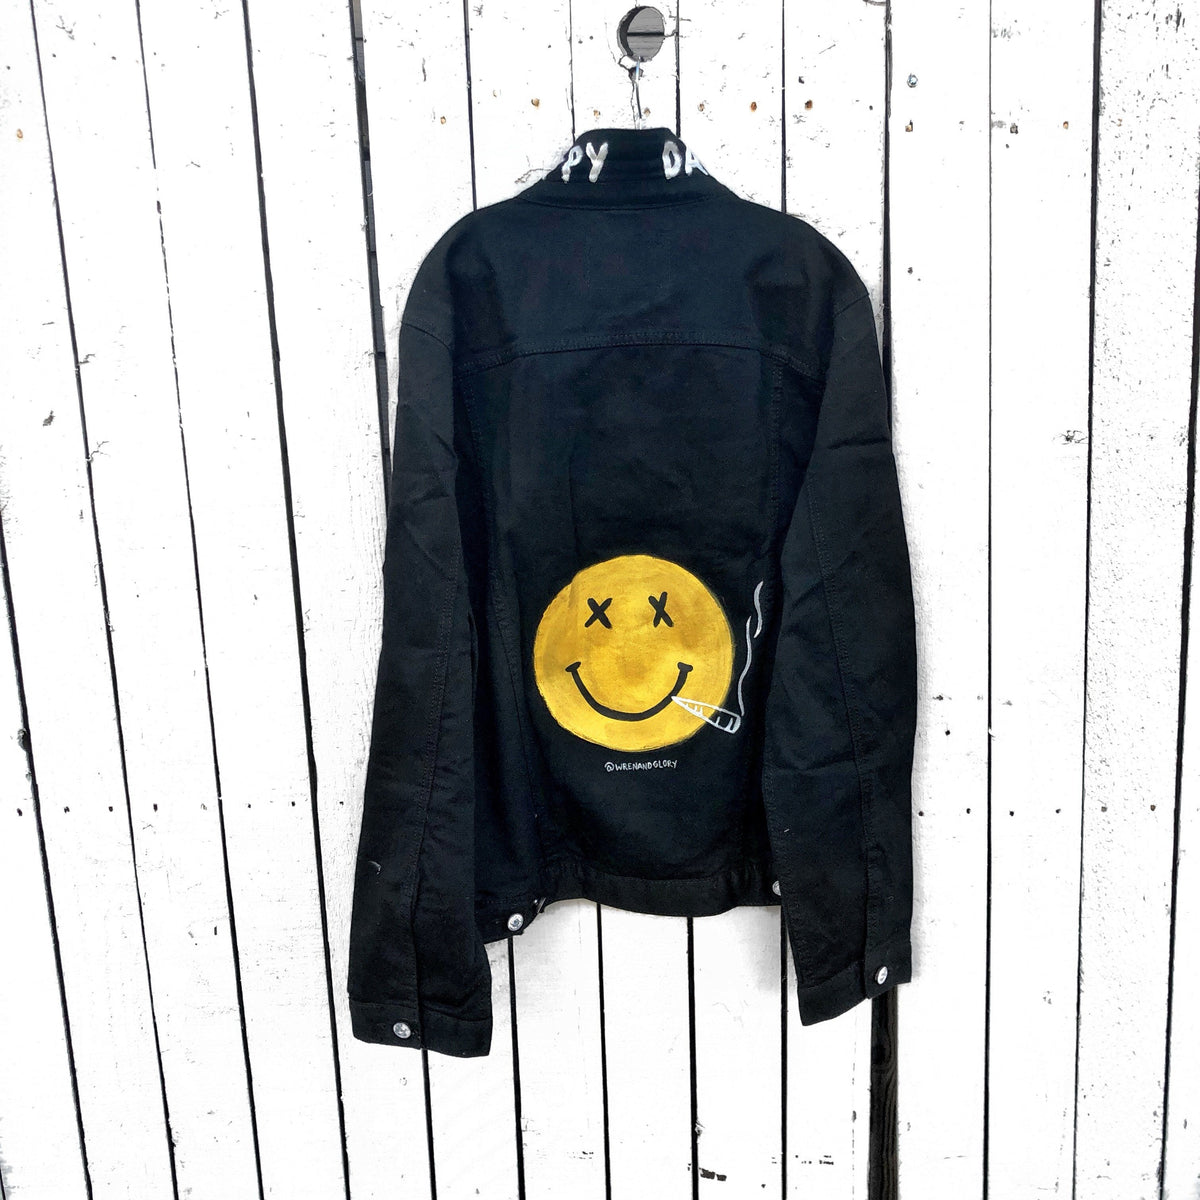 Black denim. Yellow smiley with smoking utensil on back. Happy Daze painted on collar in white. Signed @wrenandglory.